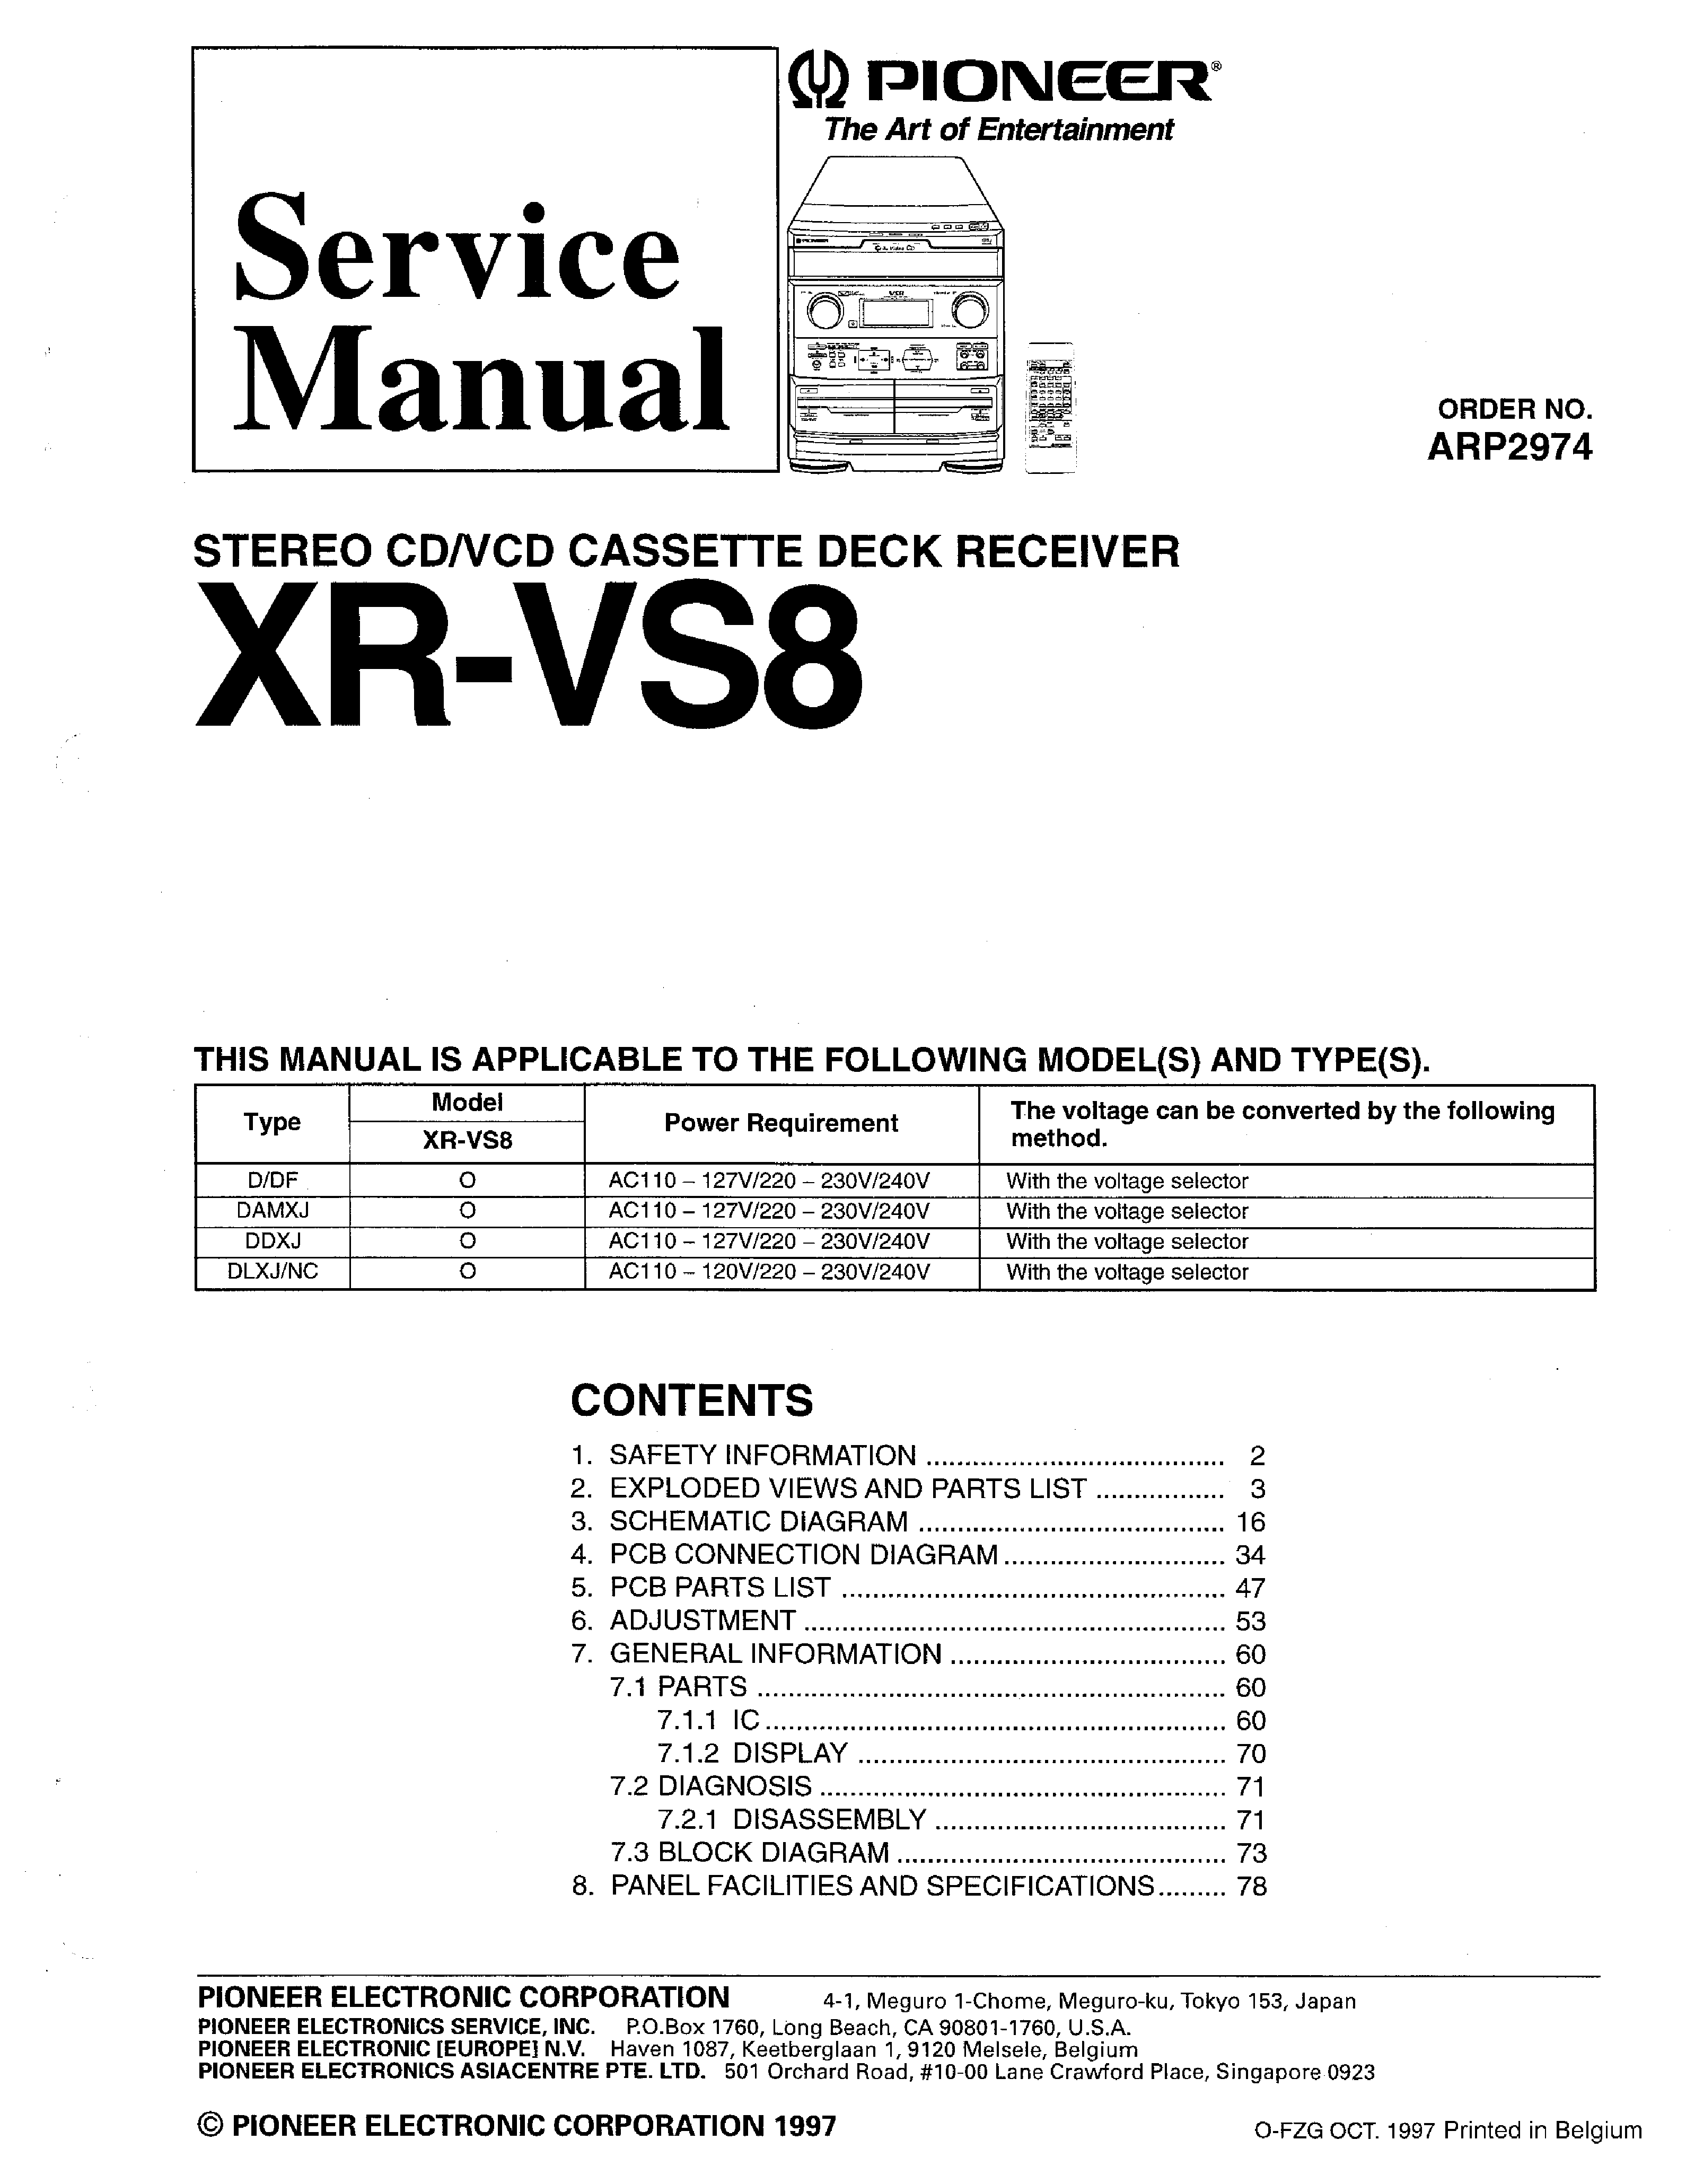 PIONEER XR-VS8 service manual (1st page)